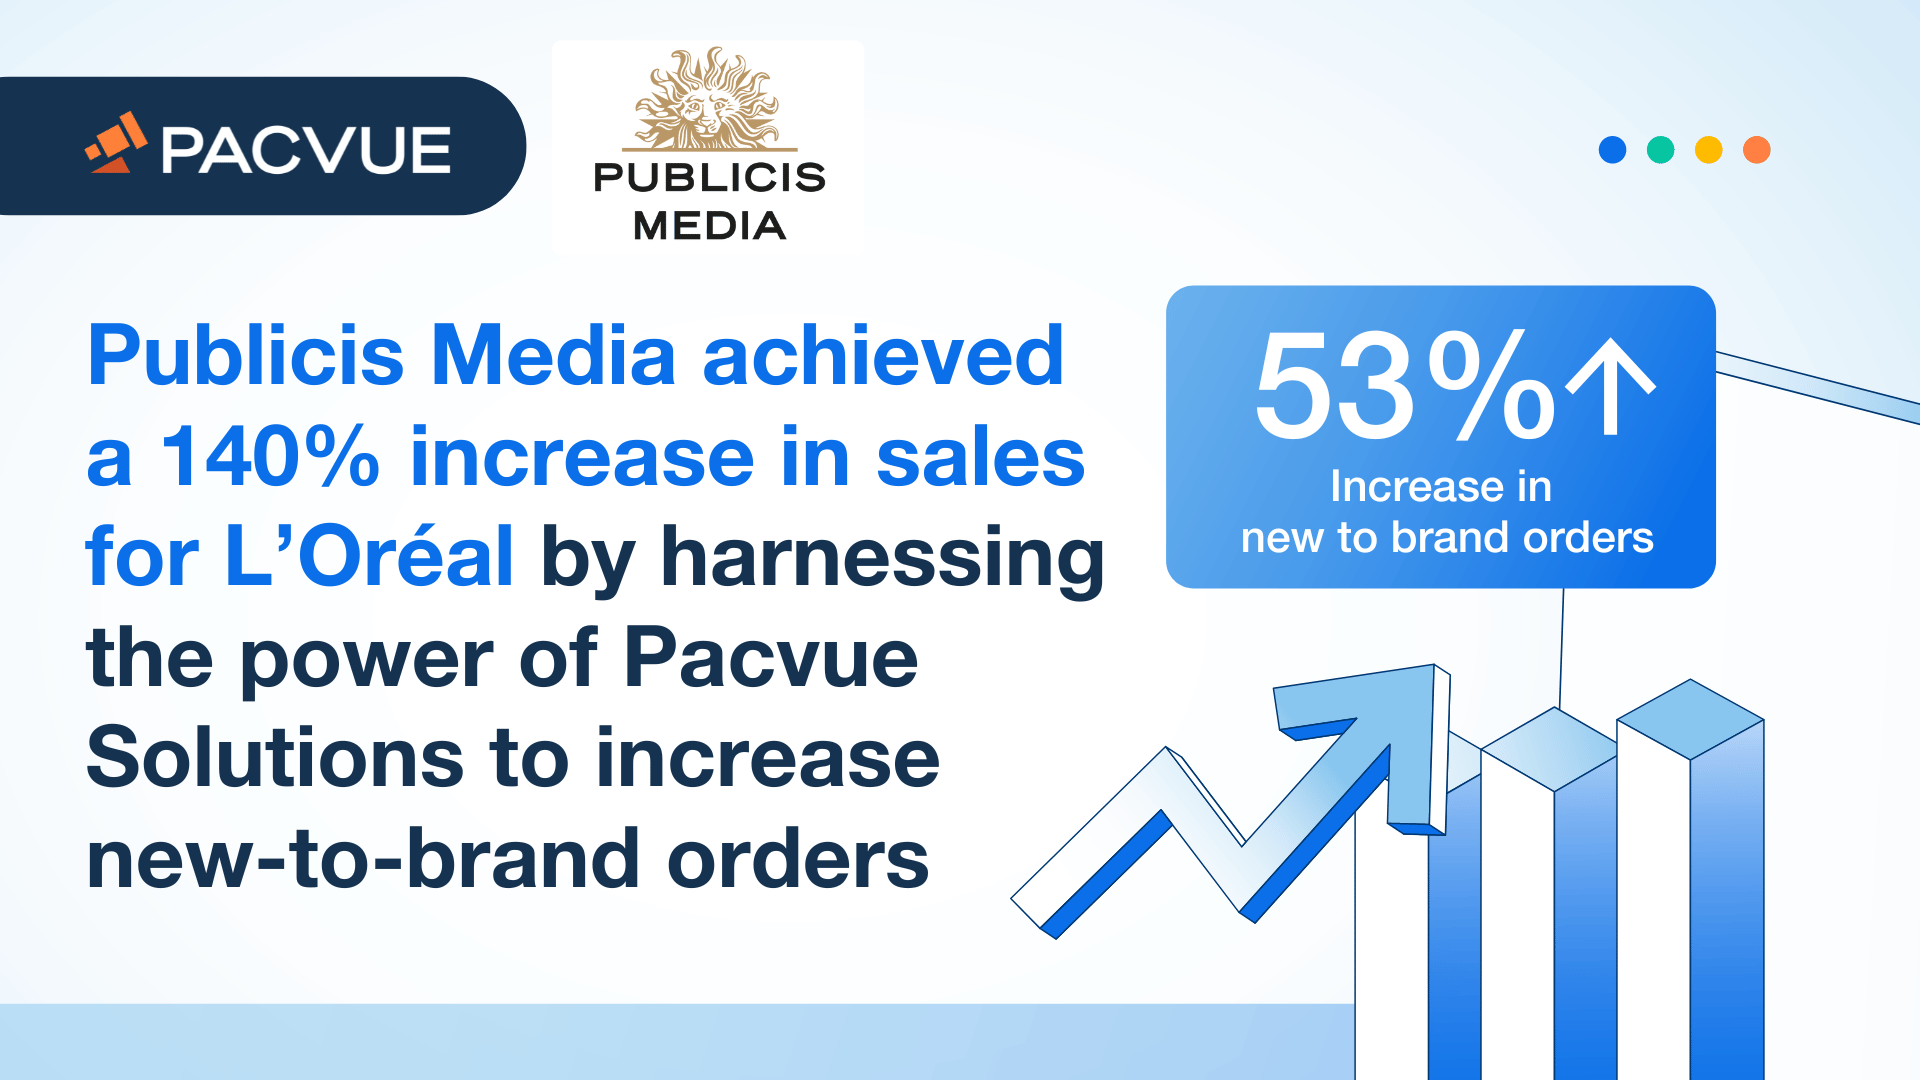 Publicis Media achieved a 140% increase in sales for L'Oréal by harnessing the power of Pacvue Solutions to increase new-to-brand orders